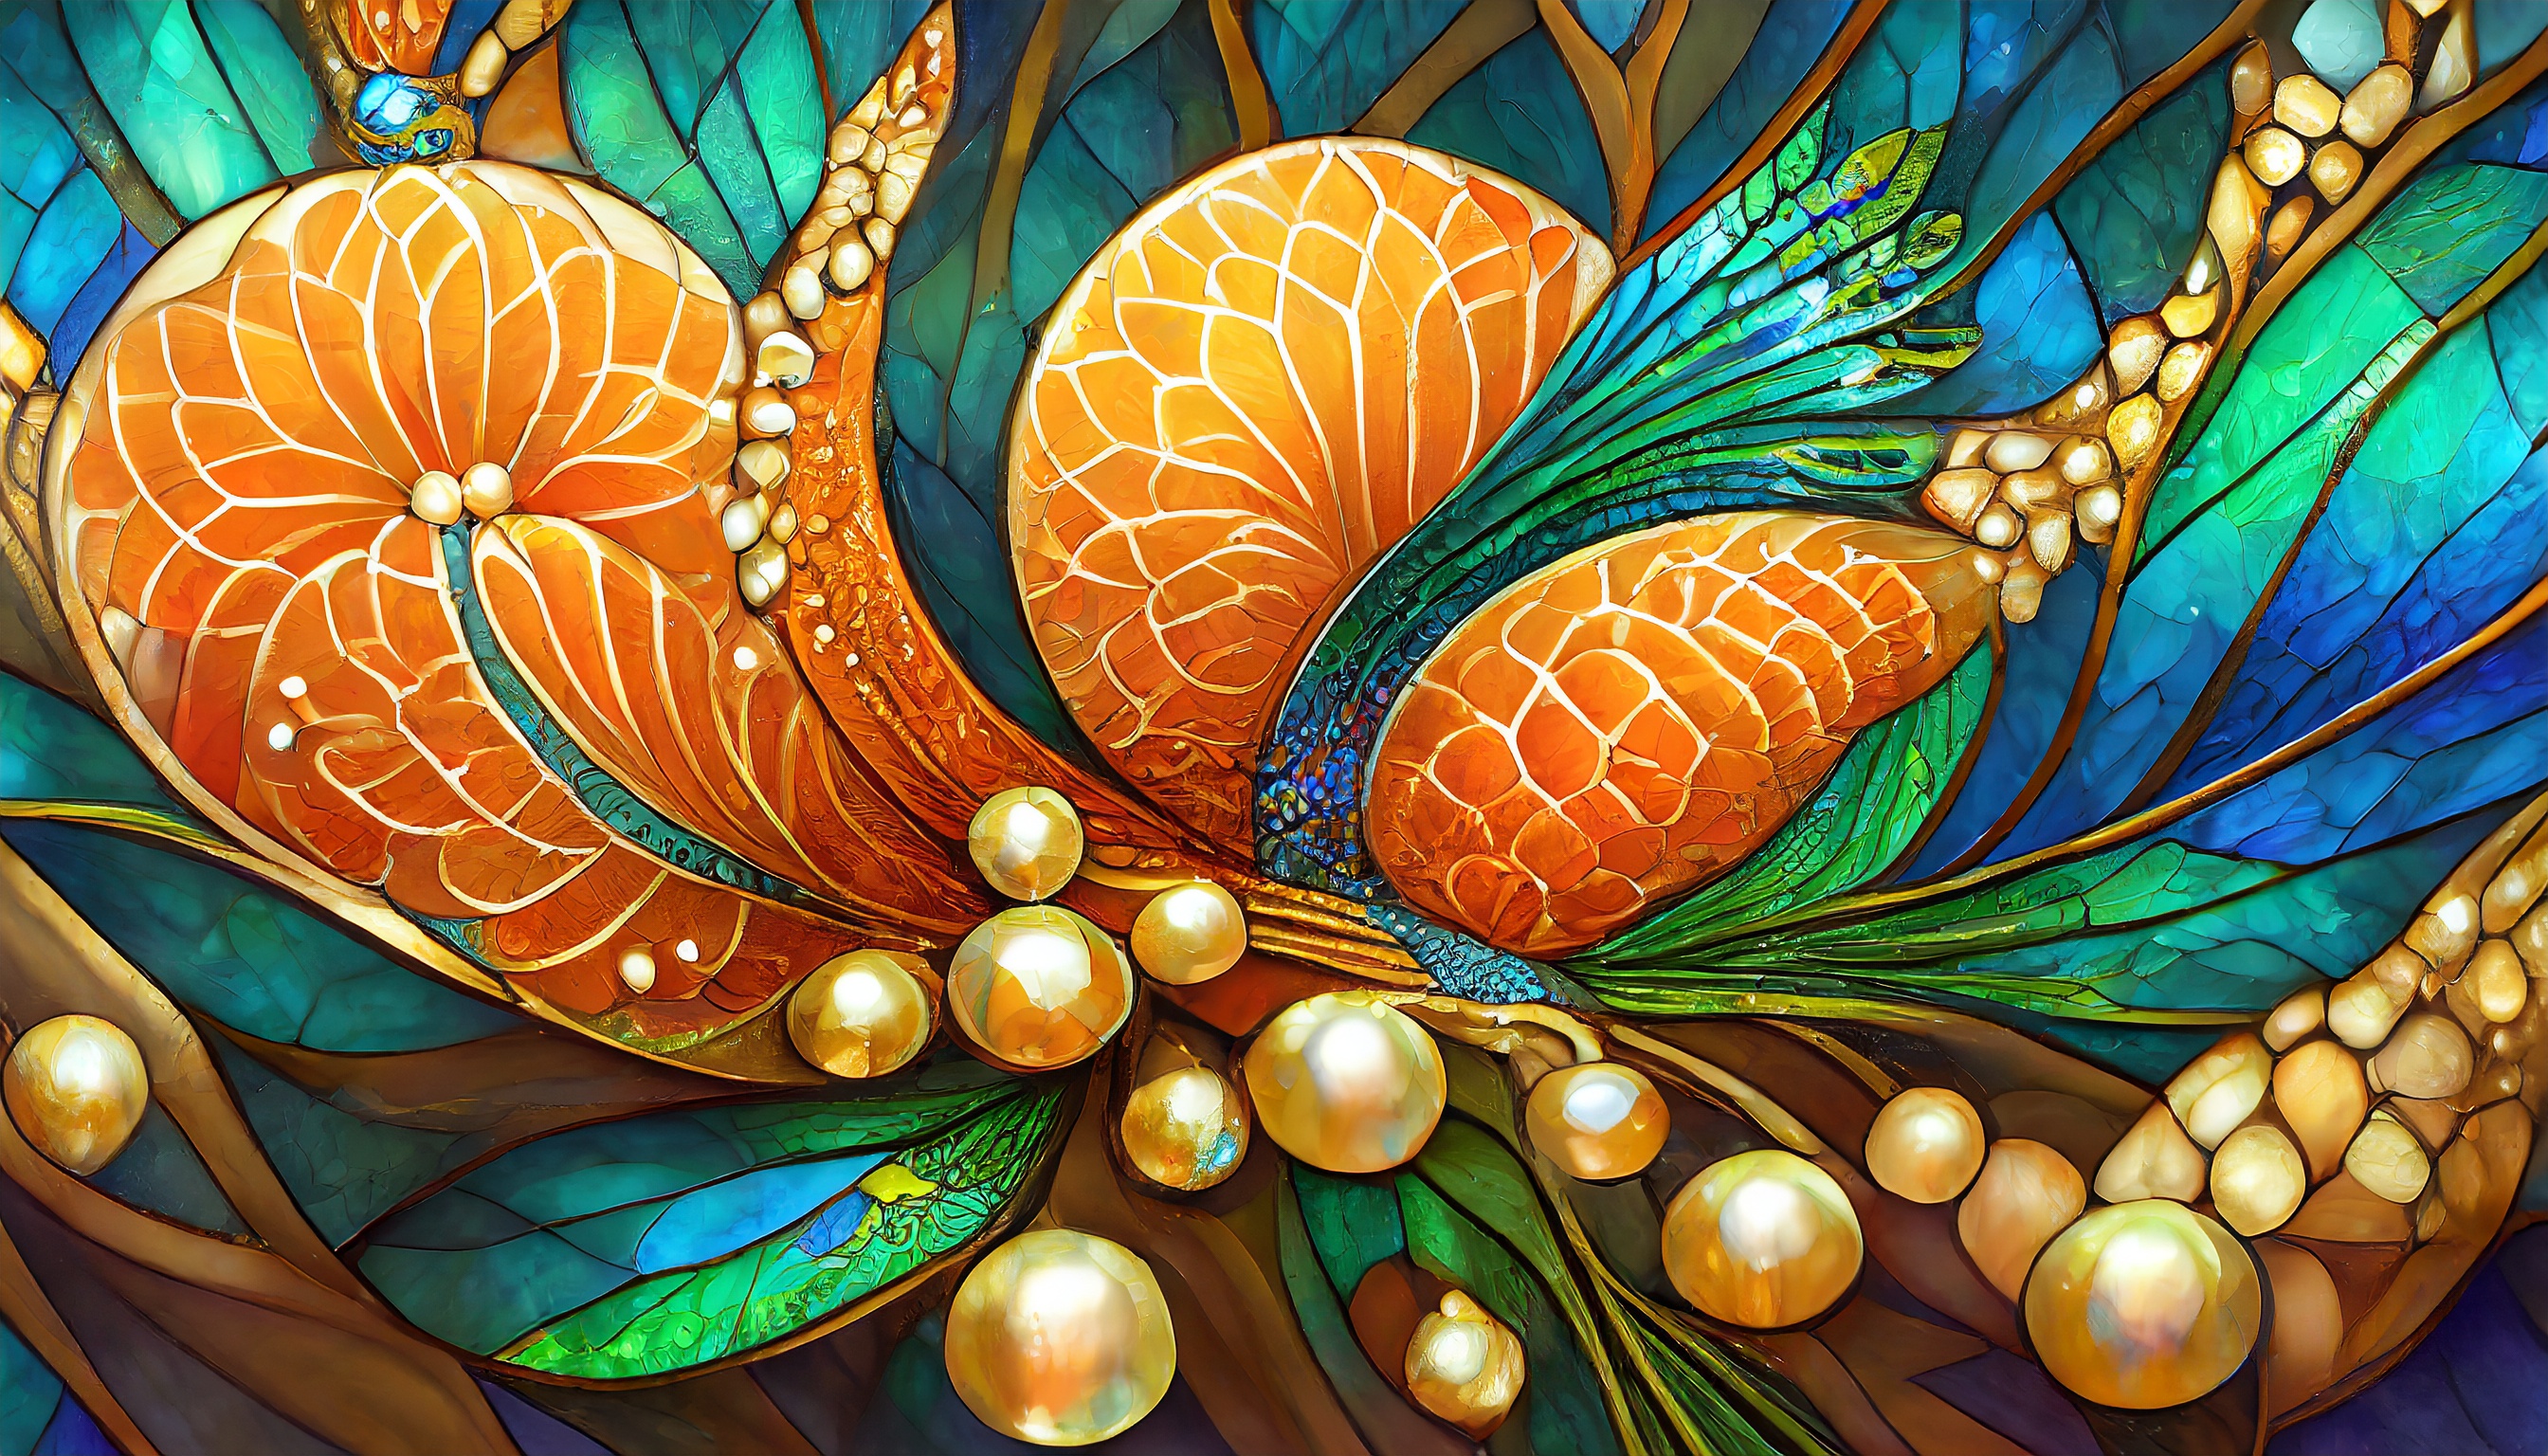 General 2688x1536 AI art digital art orange peacocks peacock feathers stained glass